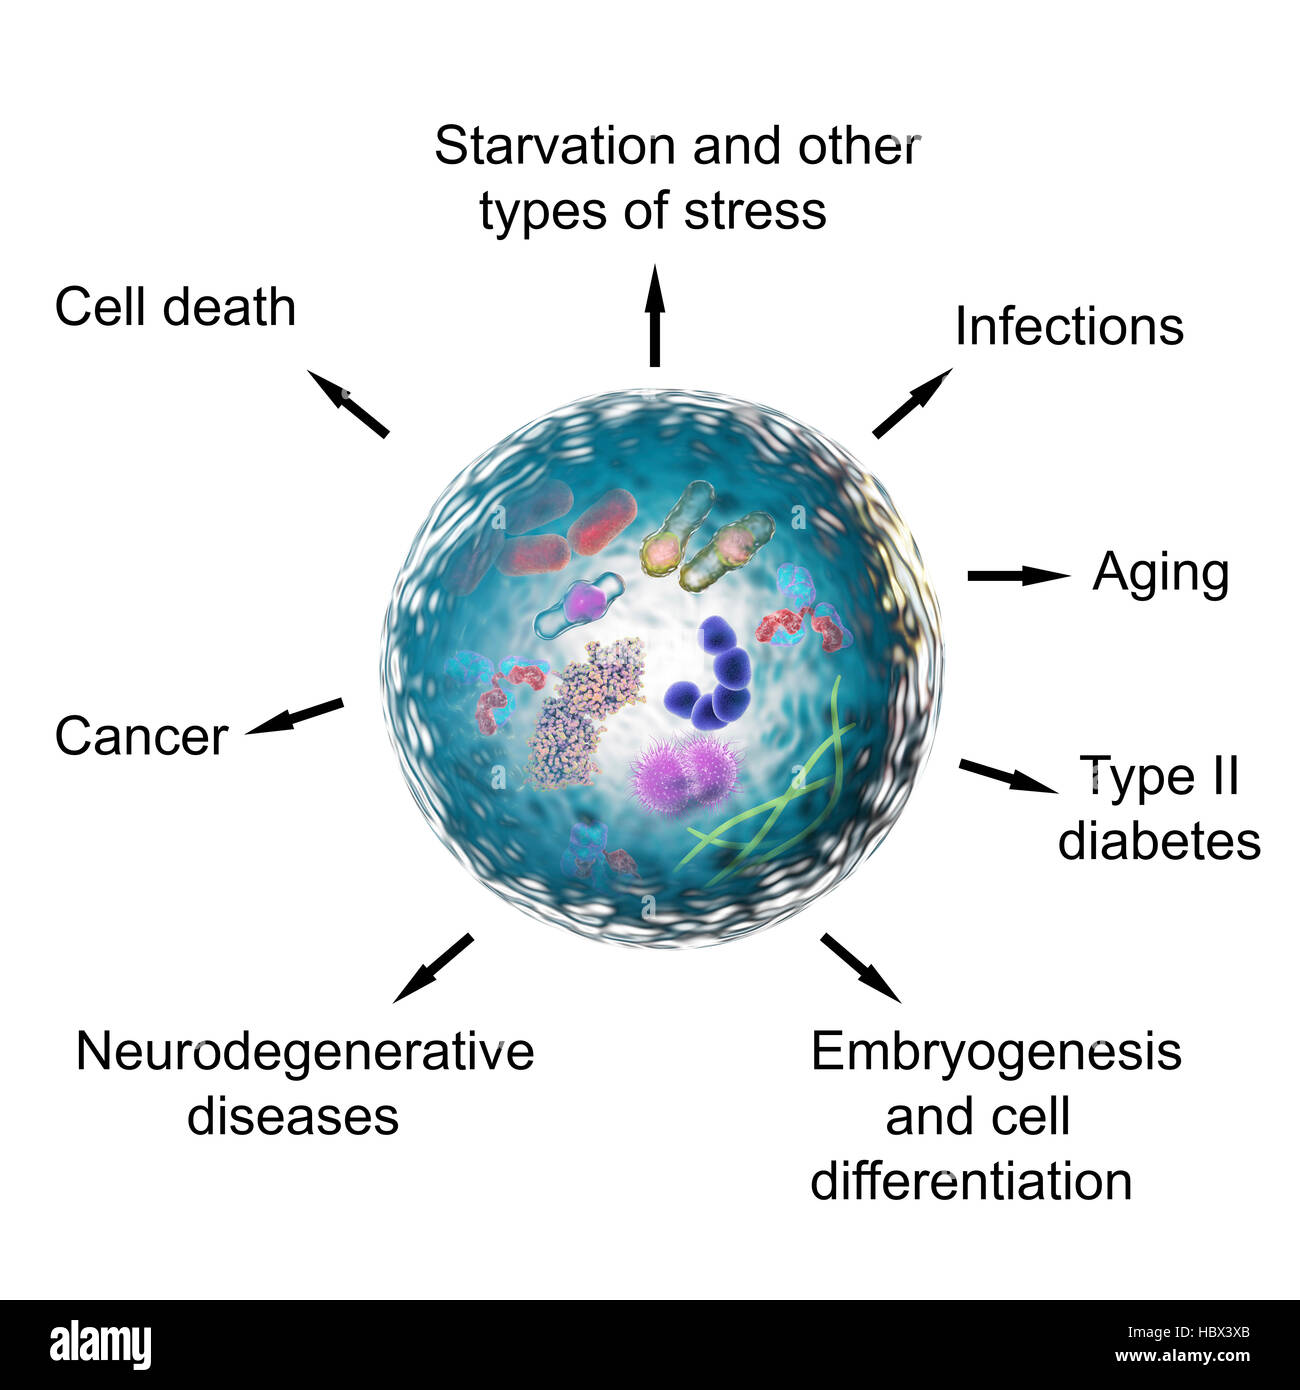 Functions of autophagy, computer illustration. Autophagy (autophagocytosis) is the natural mechanism that destroys unnecessary or dysfunctional cellular components and recycles their materials. Autophagy is important in different types of stresses, including starvation, infections, aging, type II diabetes, embryogenesis and other pathological and physiological conditions. Stock Photo